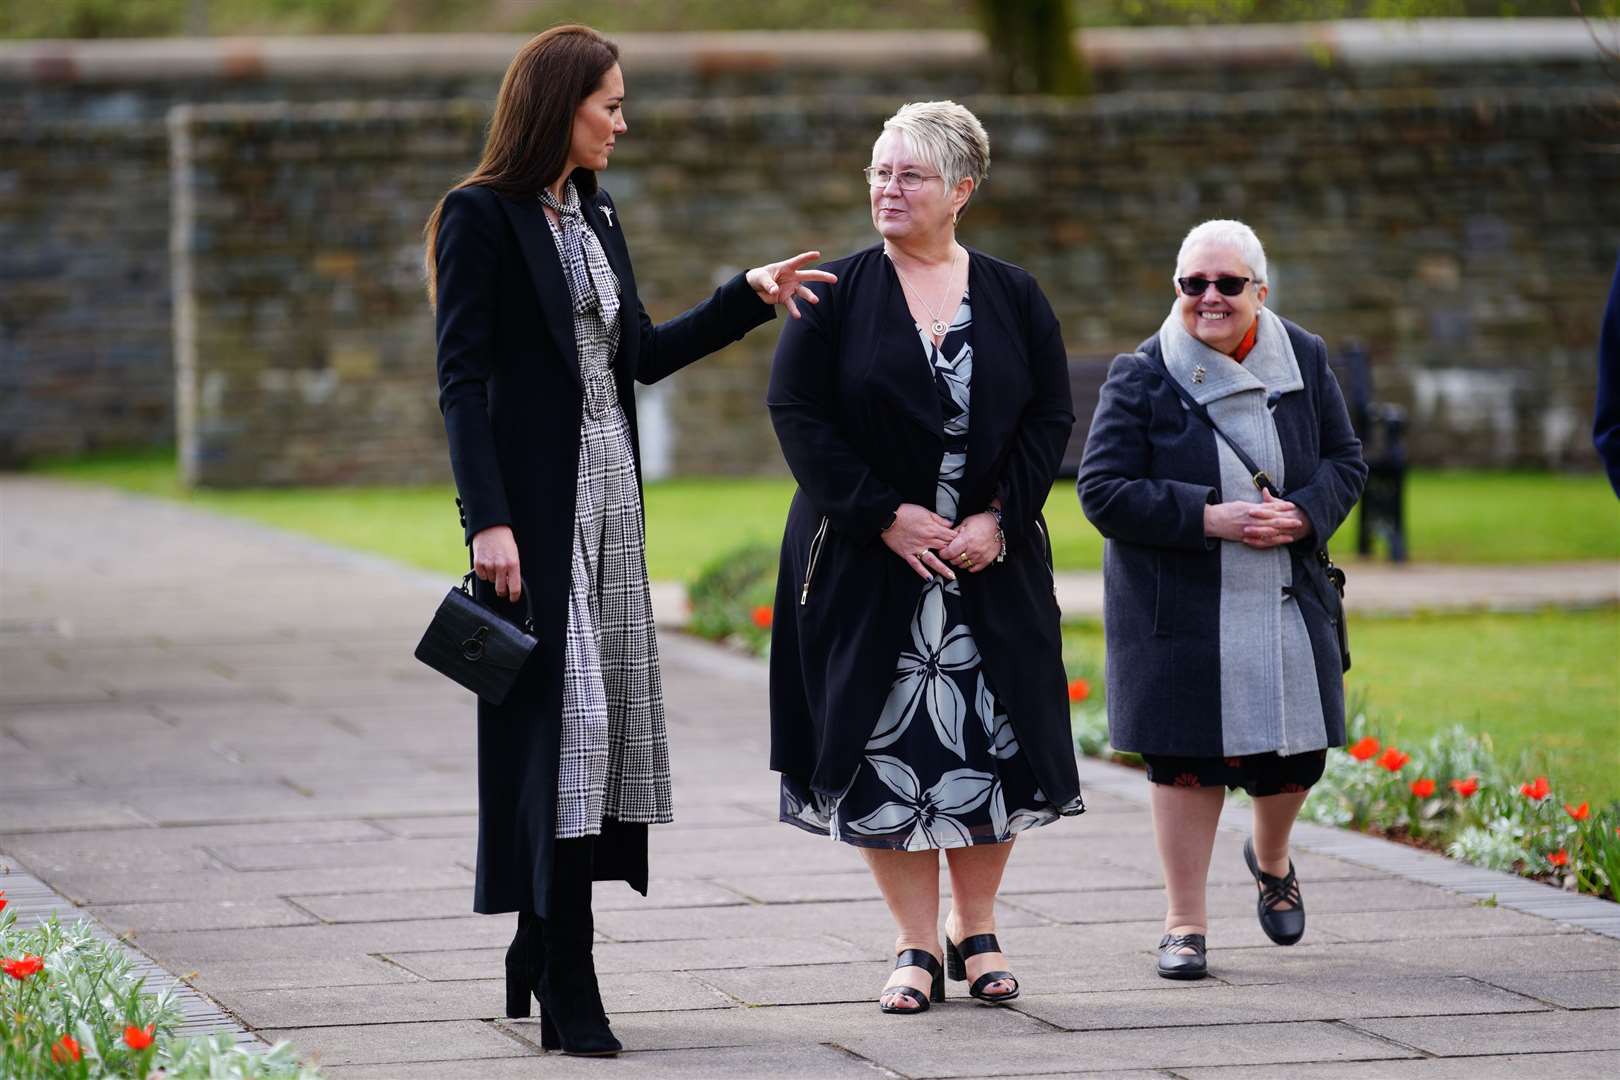 The Princess of Wales during her visit to the Aberfan memorial garden (Ben Birchall/PA)